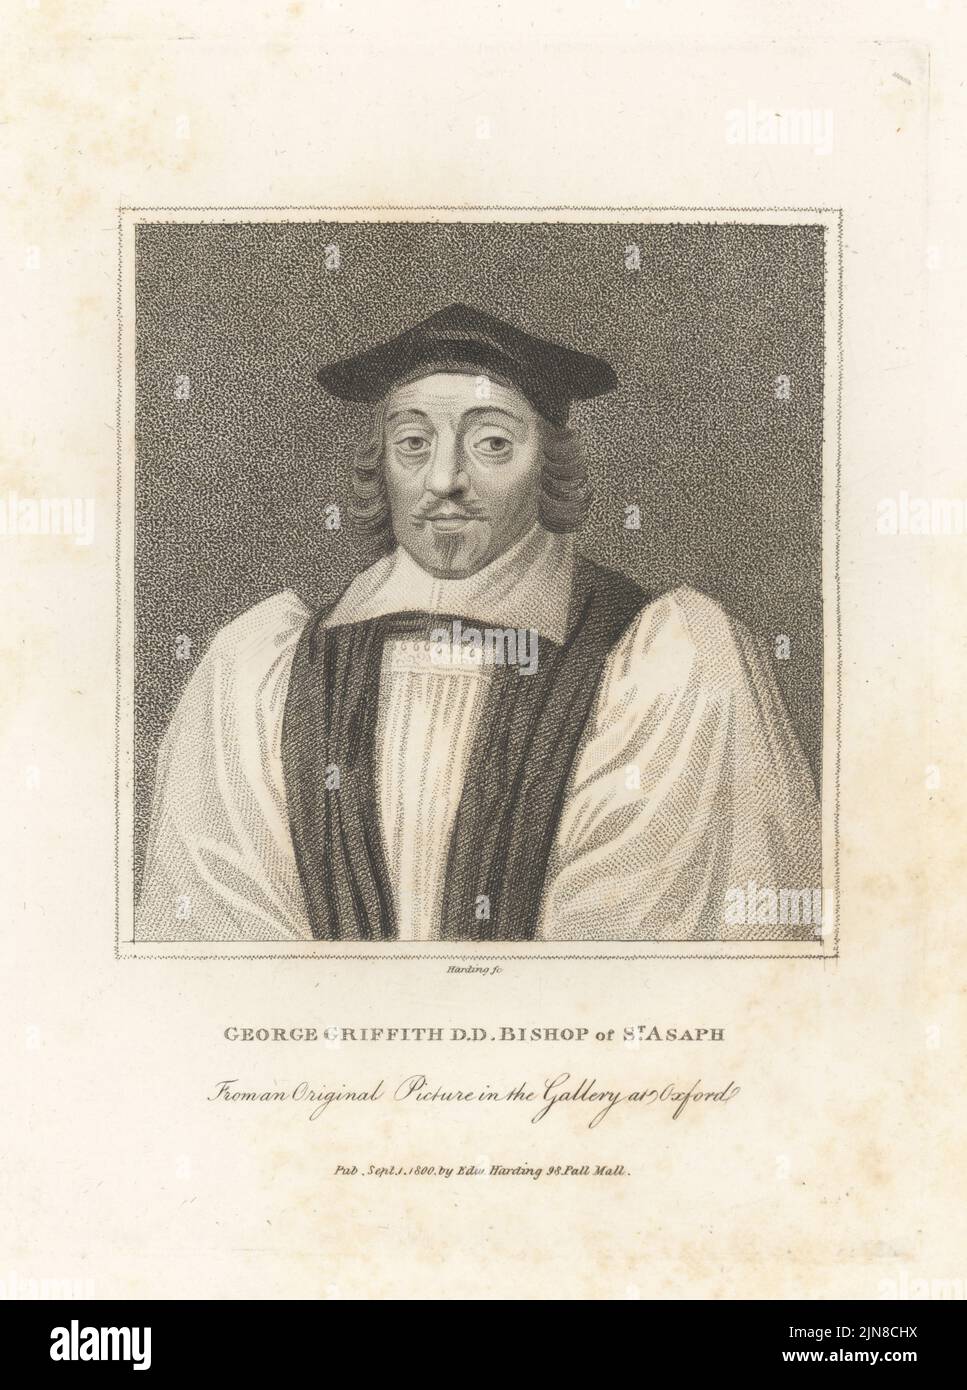 George Griffith, Bishop of St. Asaph, 1601-1666. Welsh academic educated at Westminster School, later tutor and preacher at Christ Church, Oxford. In cap, ecclesiastical robes. From a painting in the university. Copperplate engraving by Edward Harding from John Adolphus’ The British Cabinet, containing Portraits of Illustrious Personages, printed by T. Bensley for E. Harding, 98 Pall Mall, London, 1799. Stock Photo